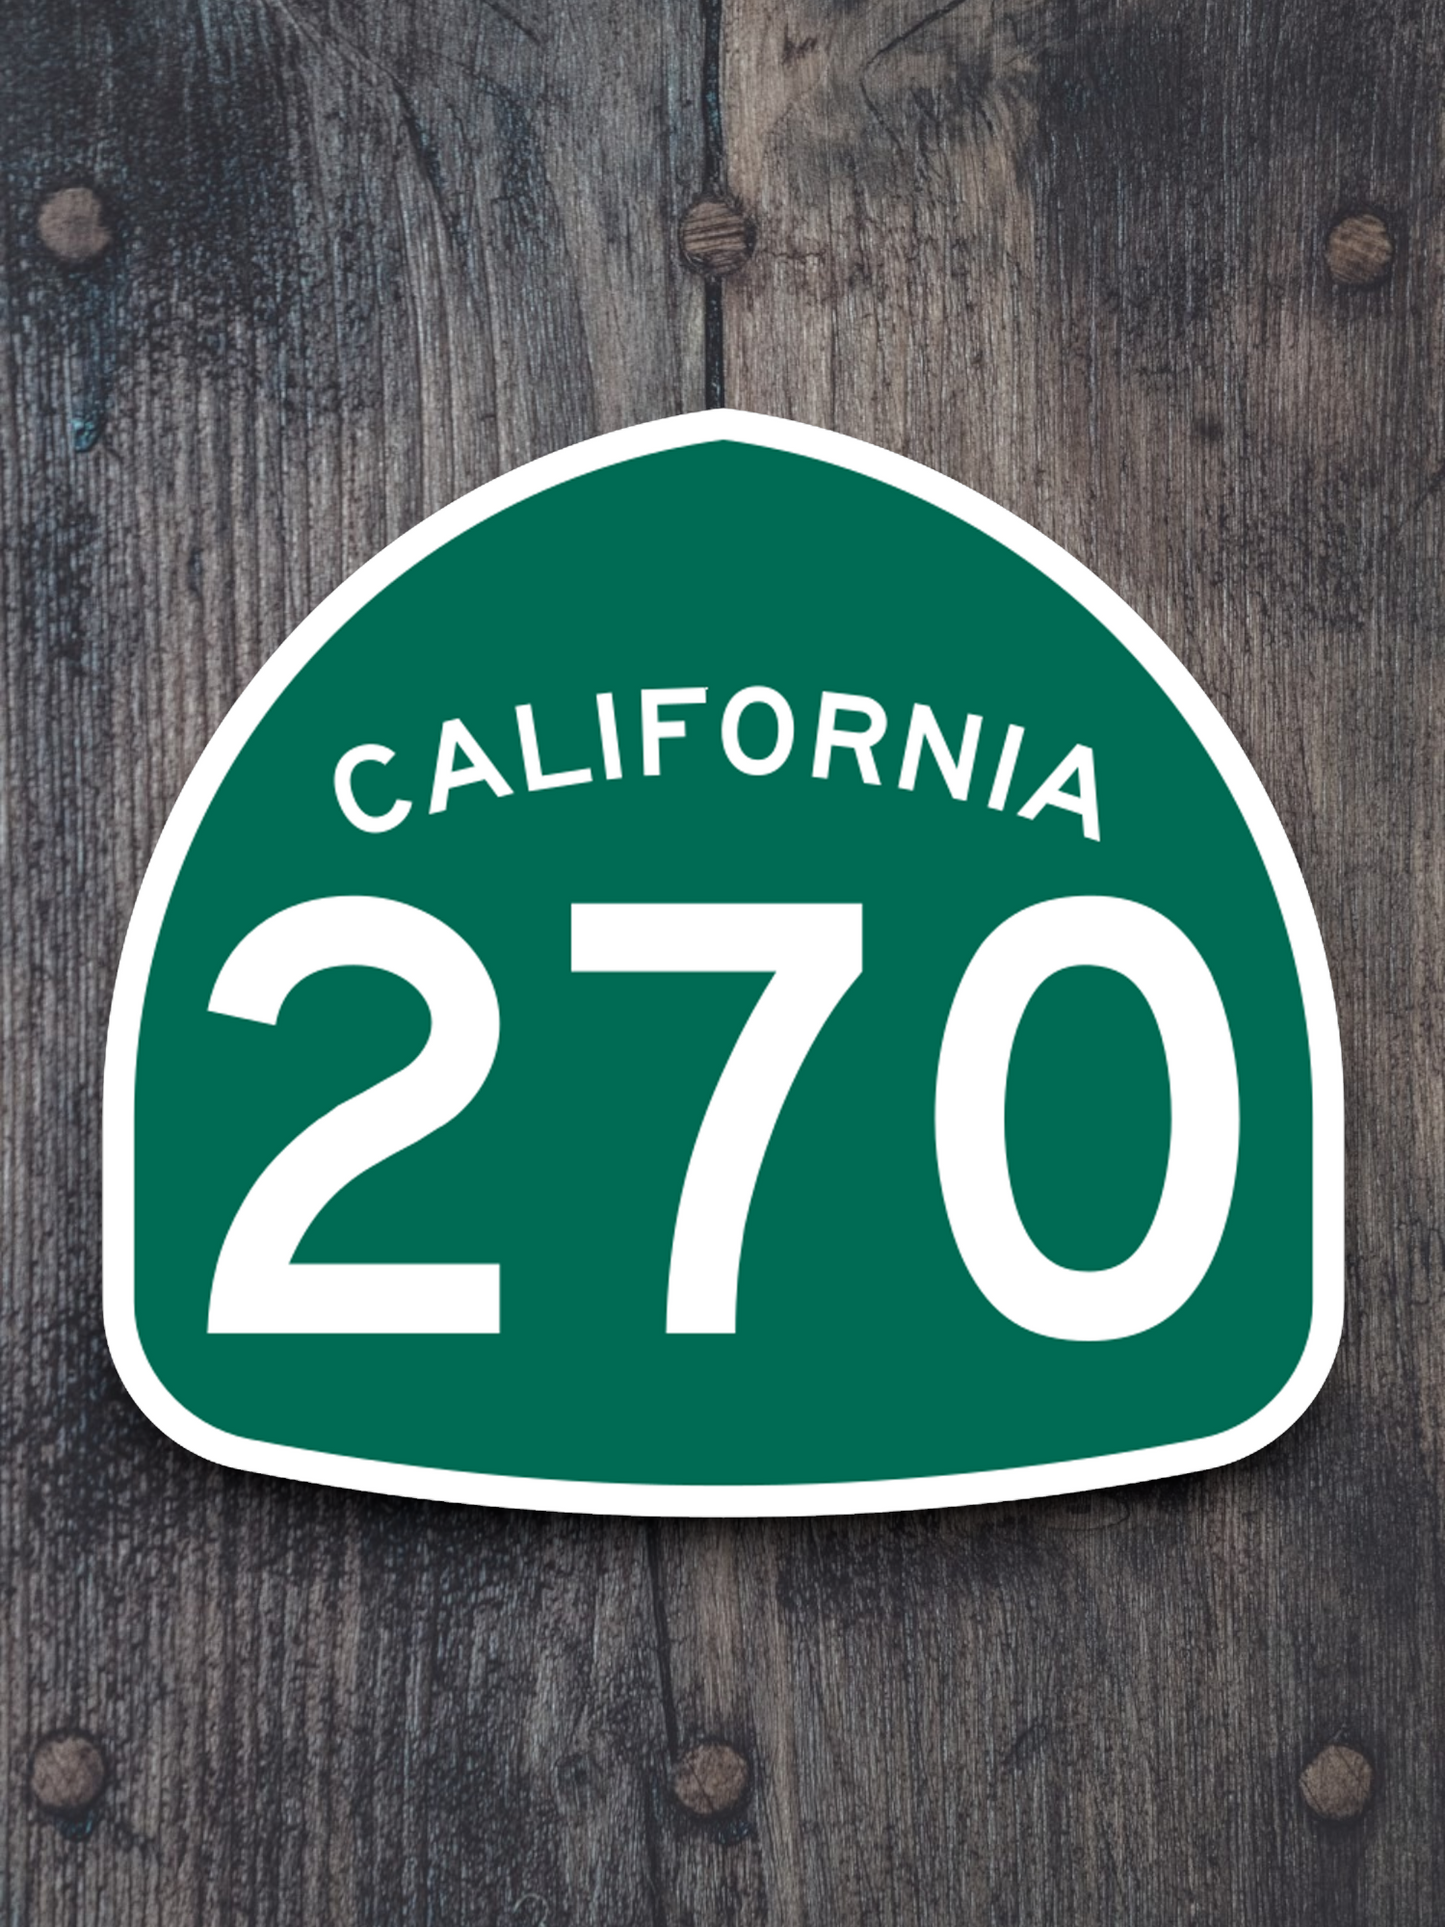 California State Route 270 Road Sign Sticker